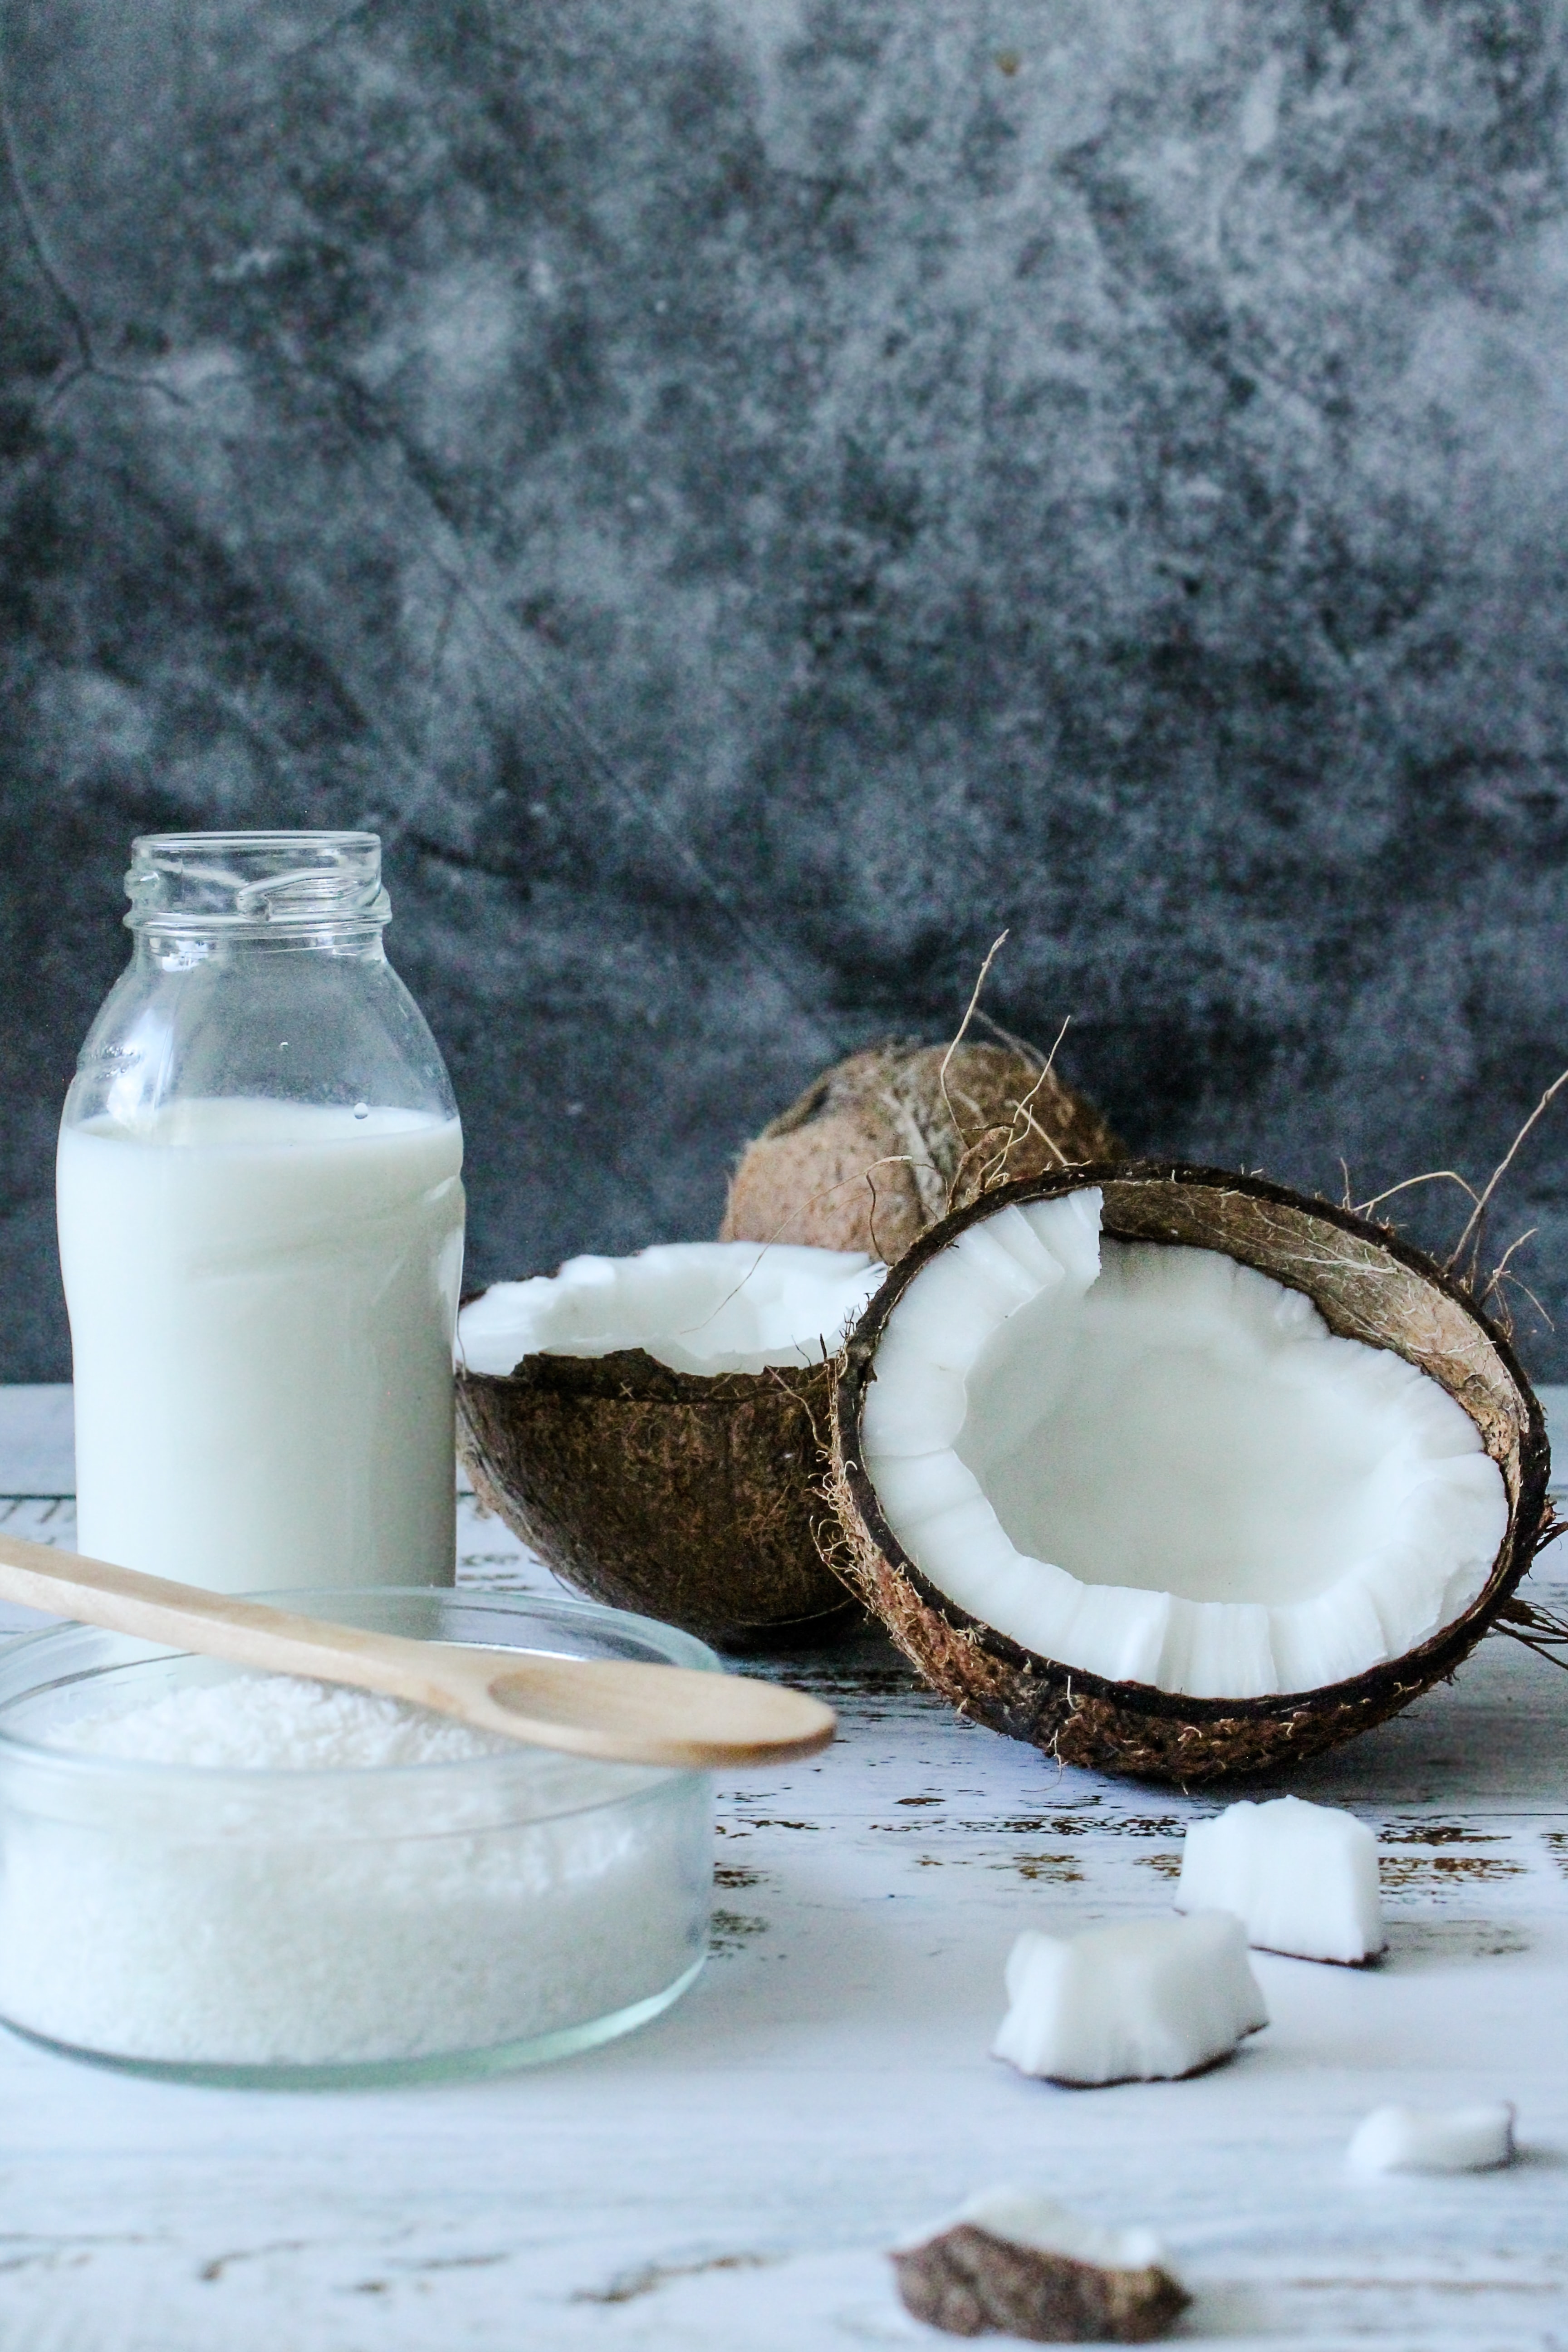 Unlike coconut water, the milk does not occur naturally. Instead, solid coconut flesh is mixed with water to make coconut milk, which is about 50% water. By contrast, coconut water is about 94% water. It contains much less fat and far fewer nutrients than coconut milk.